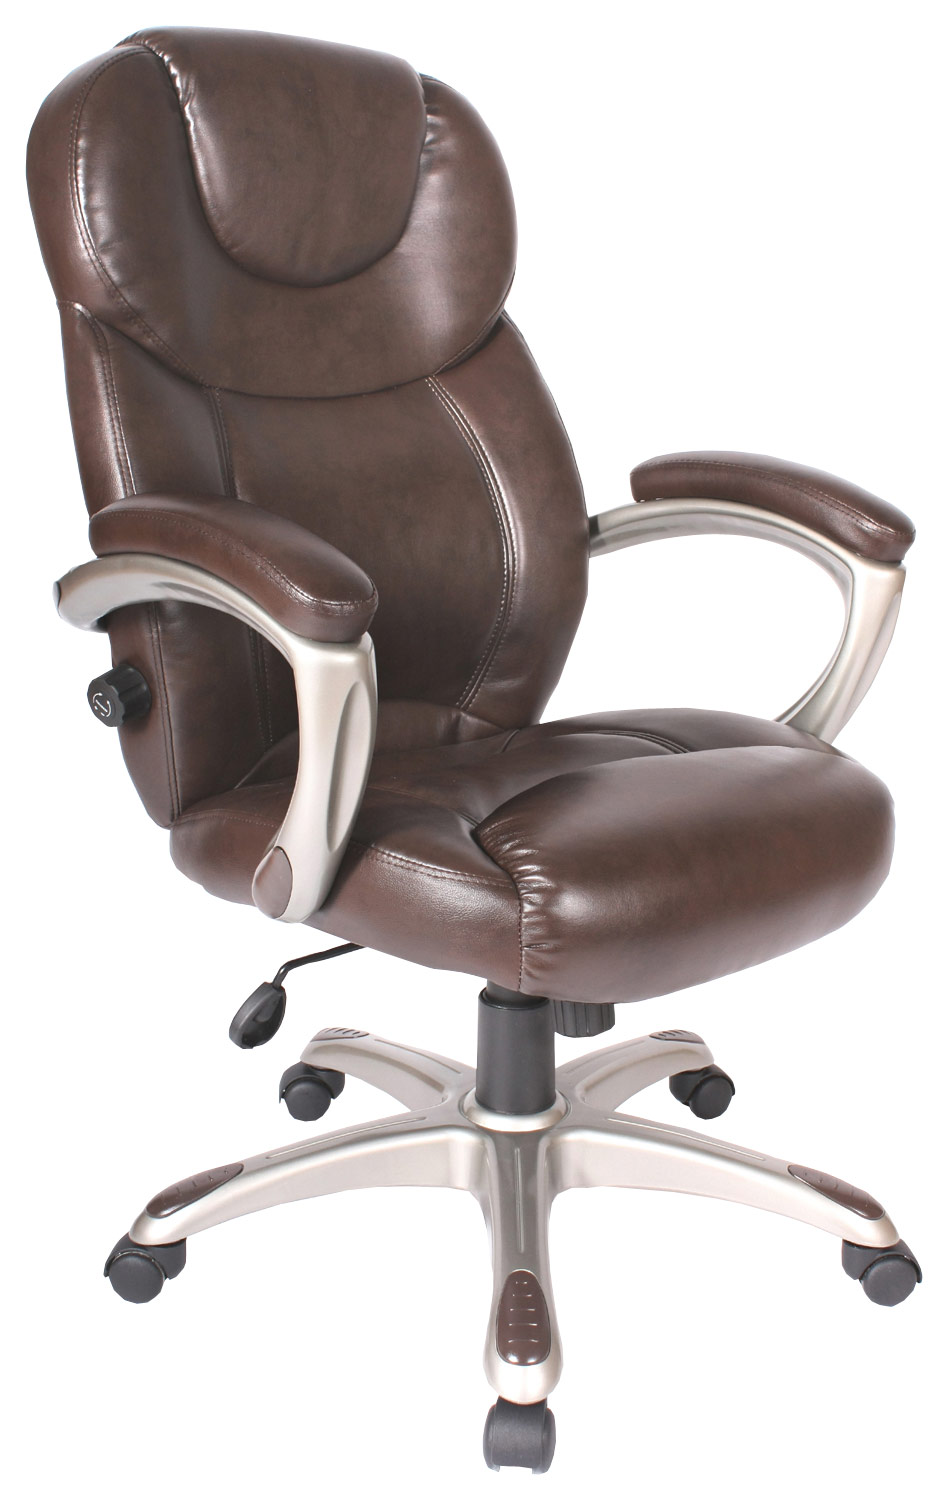 Comfort Products Inc. - Granton Leather Executive Chair - Mocha Brown